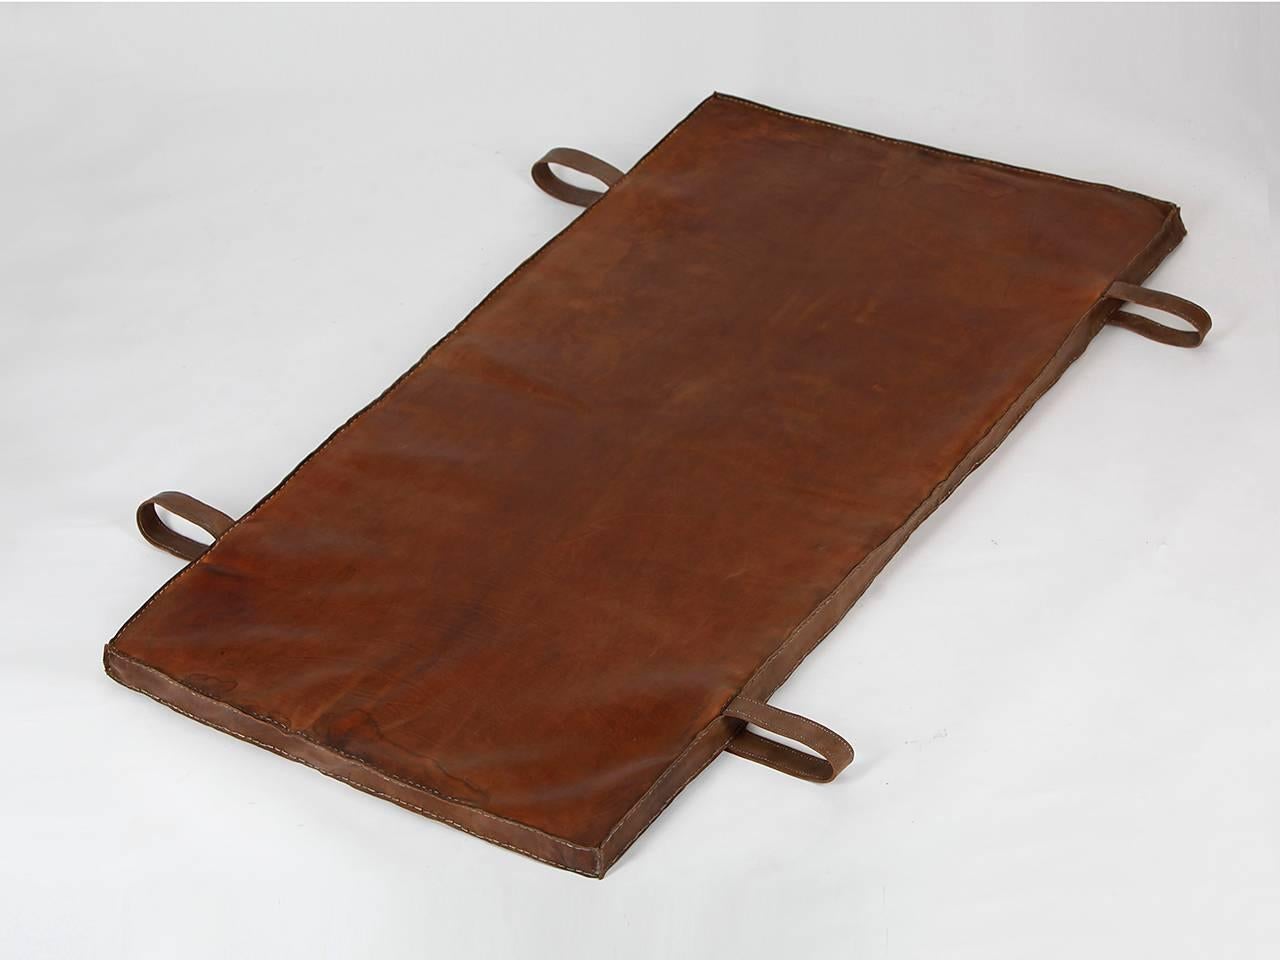 This gymnastics mat from the 1940s was salvaged from an old gymnasium in Prague. The thick cow leather was impregnated and all sides sewn again. The carrying handles were added. Fully customizable beautiful vintage condition.

We offer shop to